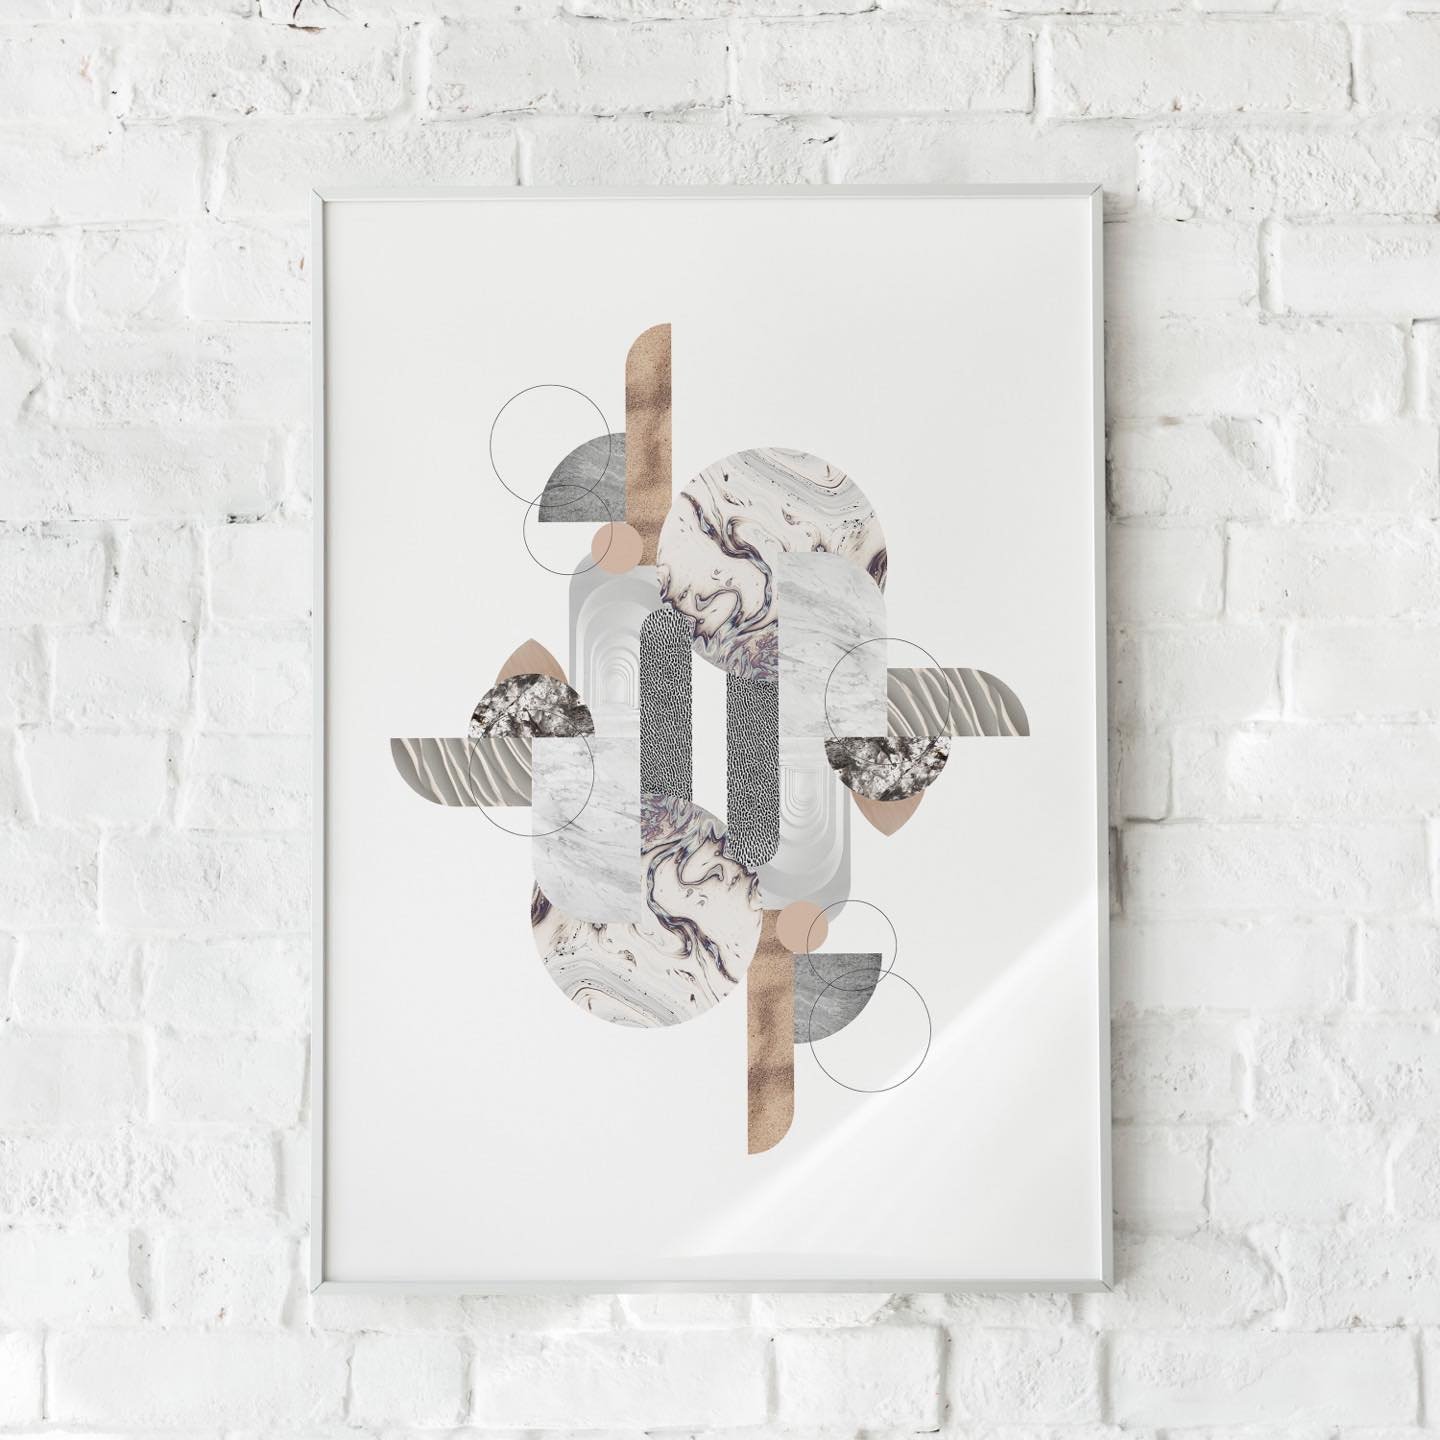 IN ORDER 04

The Studio Fleia &lsquo;In order&rsquo; series consisting of four art prints aim to remind you that Light is always greater, stronger, more powerful than the dark. May knowing this give you strength and peace in your everyday life. Trust